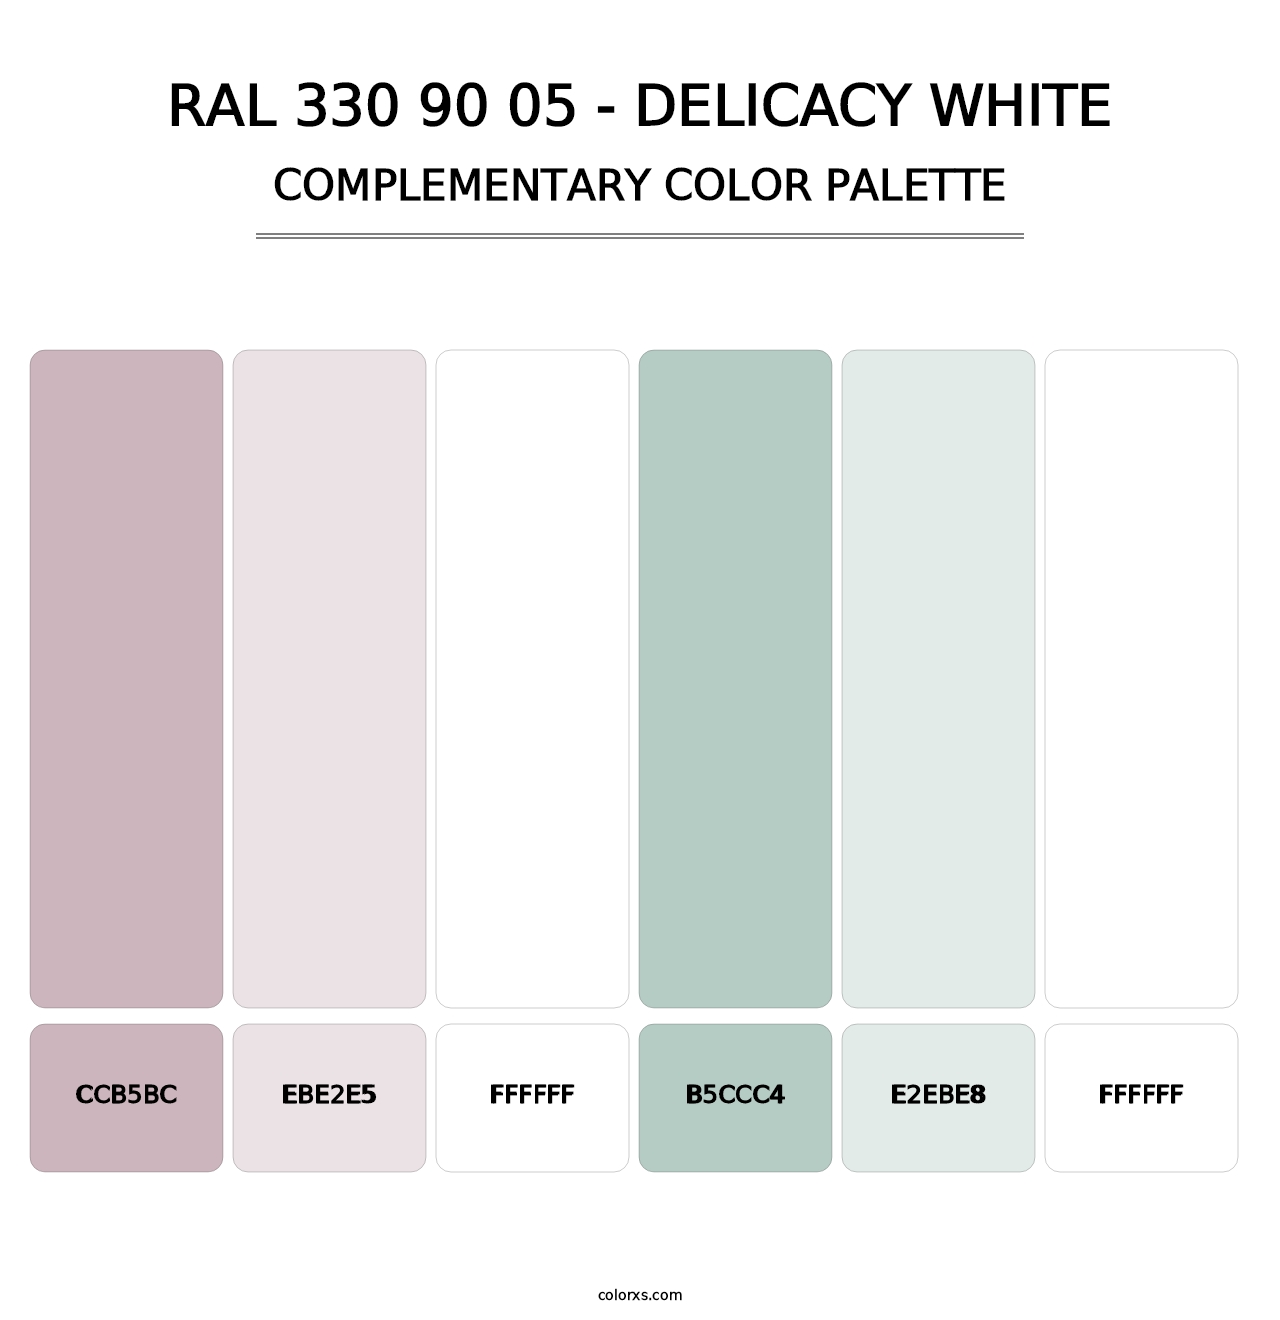 RAL 330 90 05 - Delicacy White - Complementary Color Palette